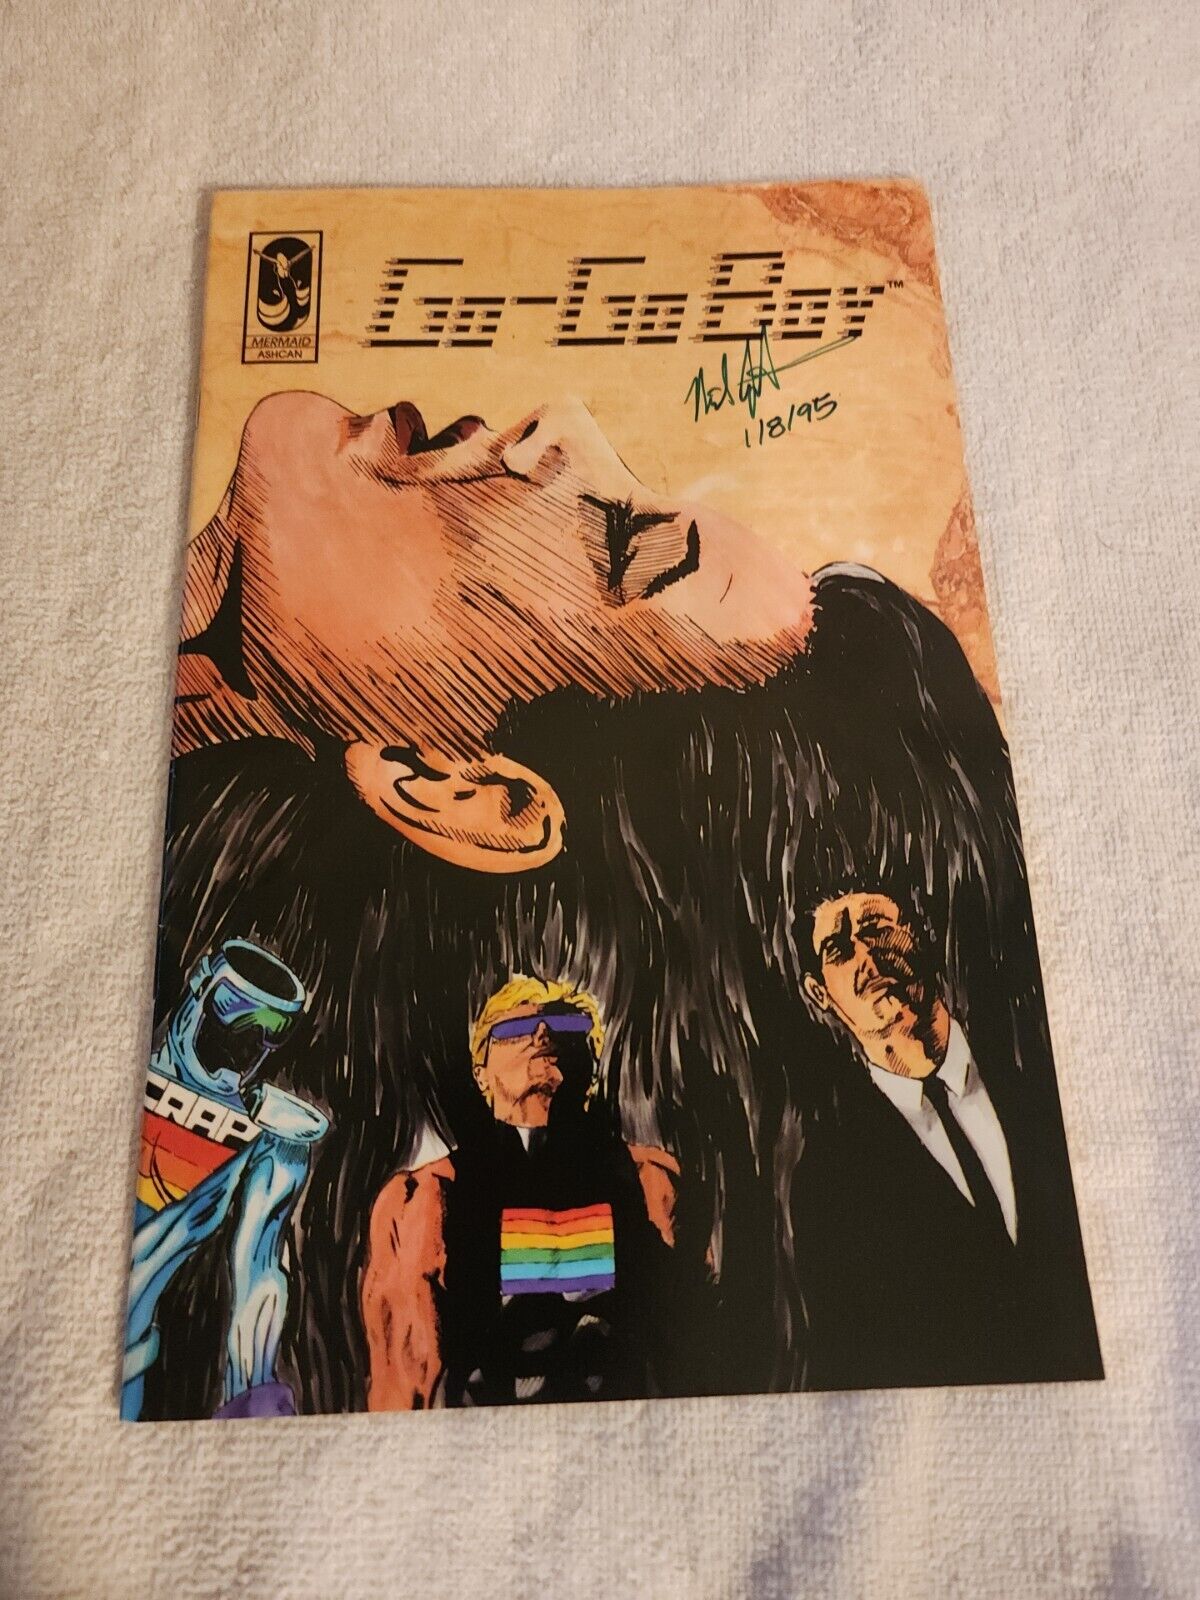 Go - Go Boy Ashcan. First Printing. Autographed. Printed In Canada - Comic Book